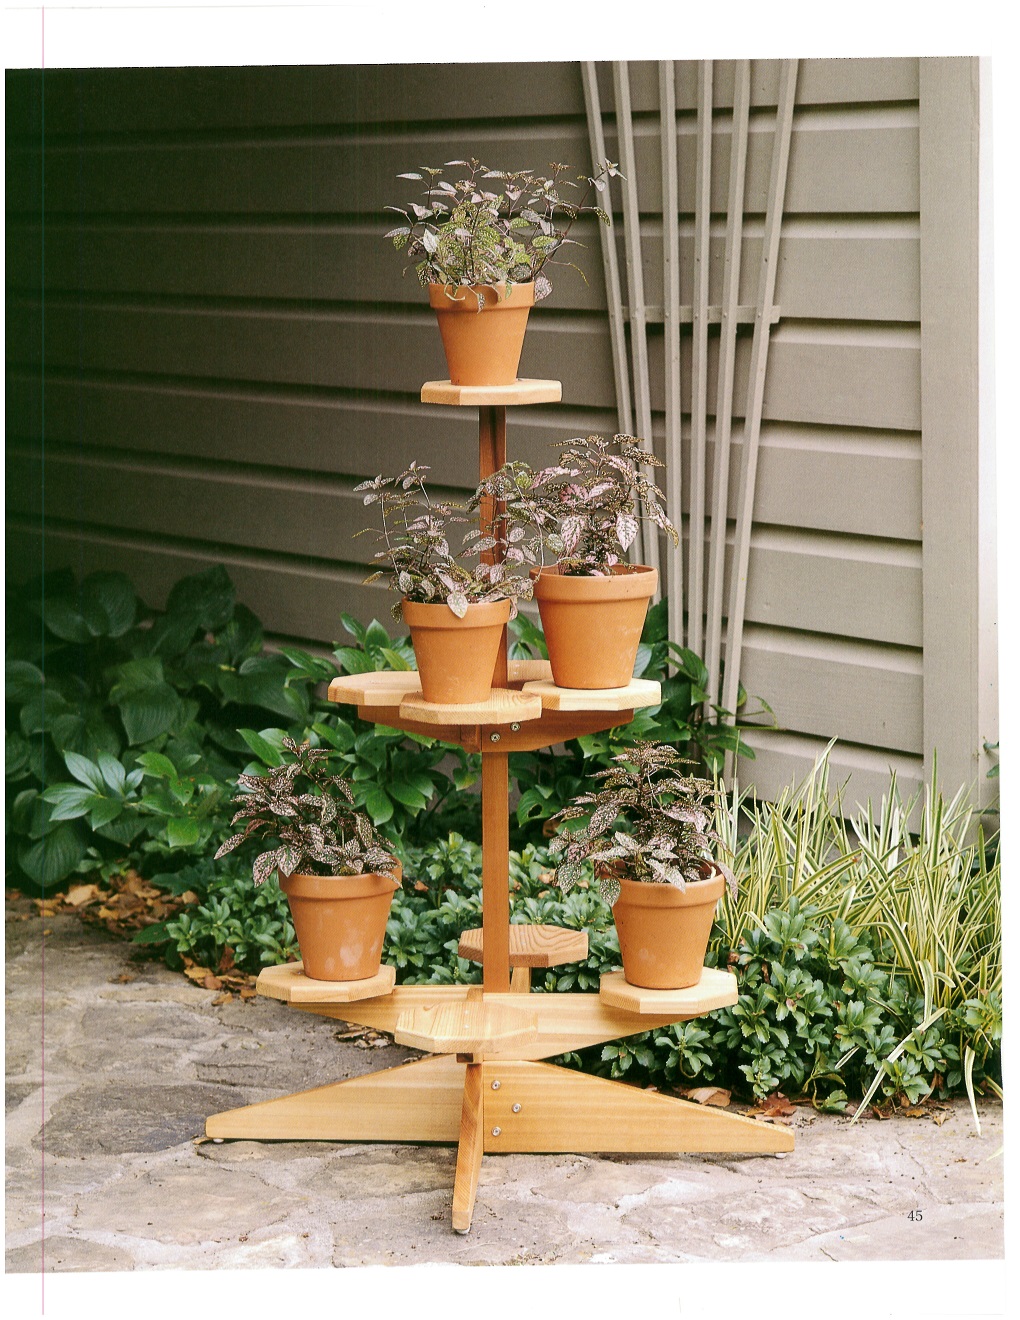 Woodworking Projects for the Garden | WoodWorkers Guild of America